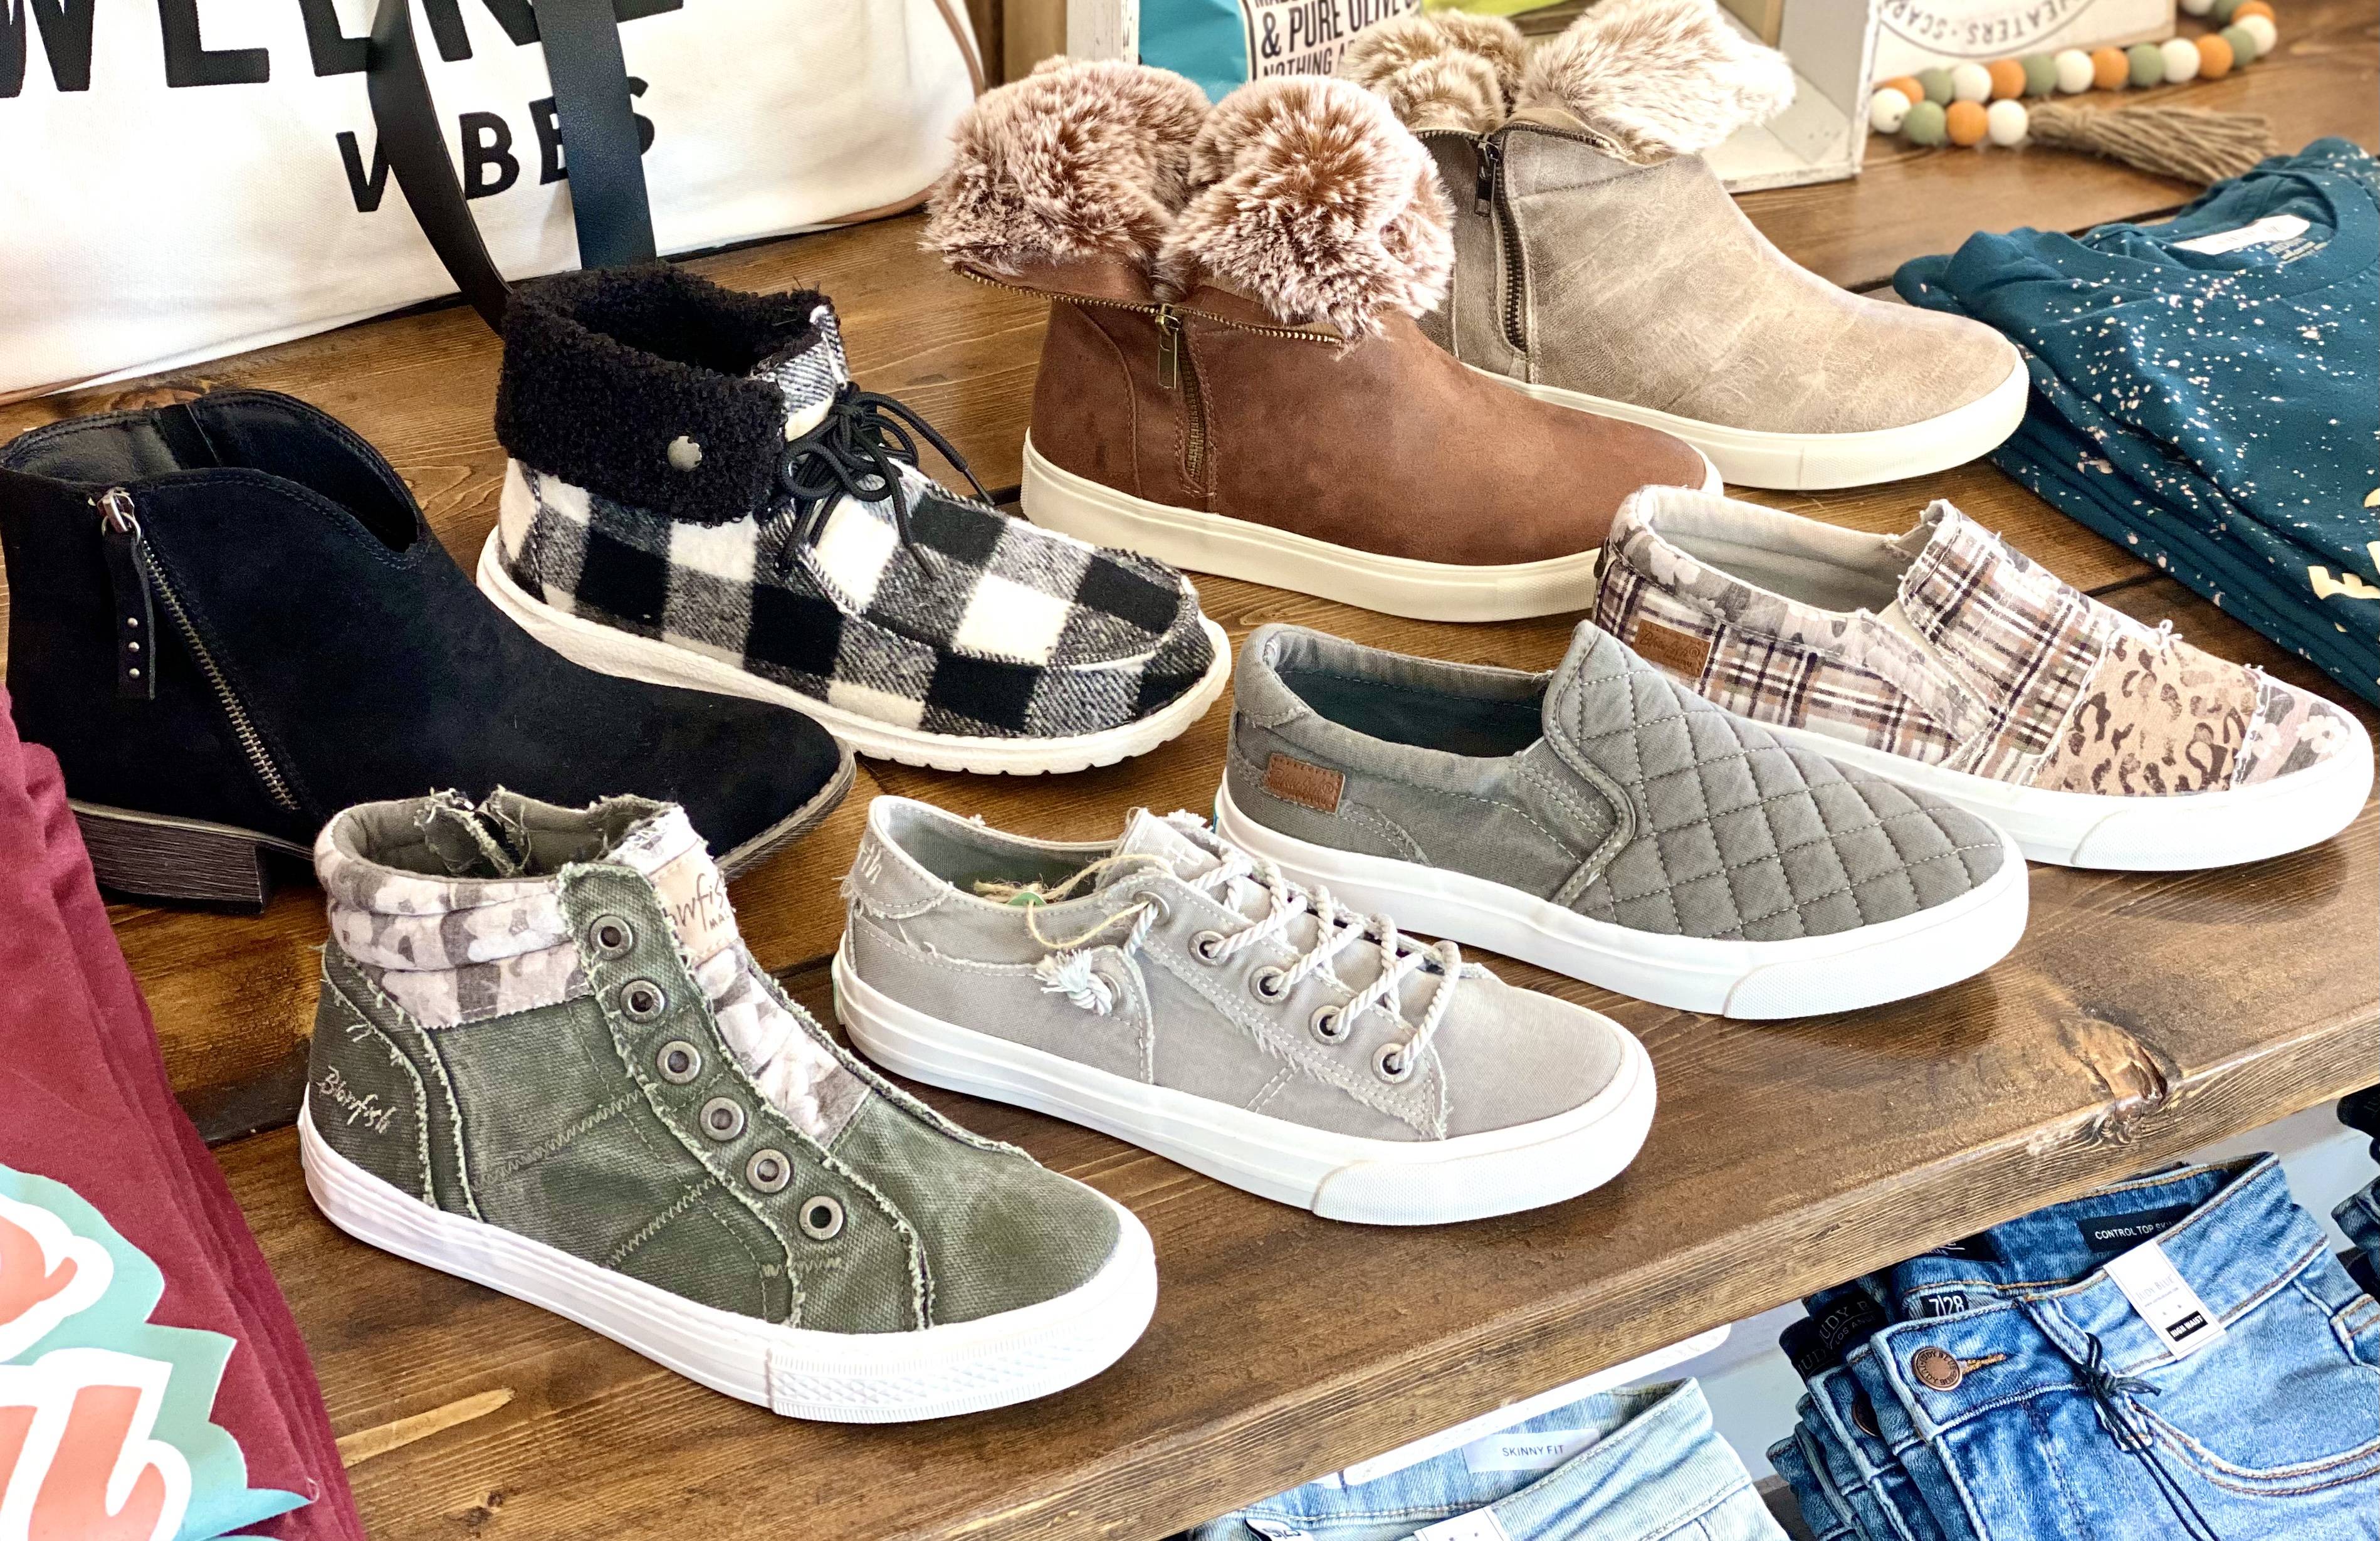 Shop Our Entire Footwear Collection!